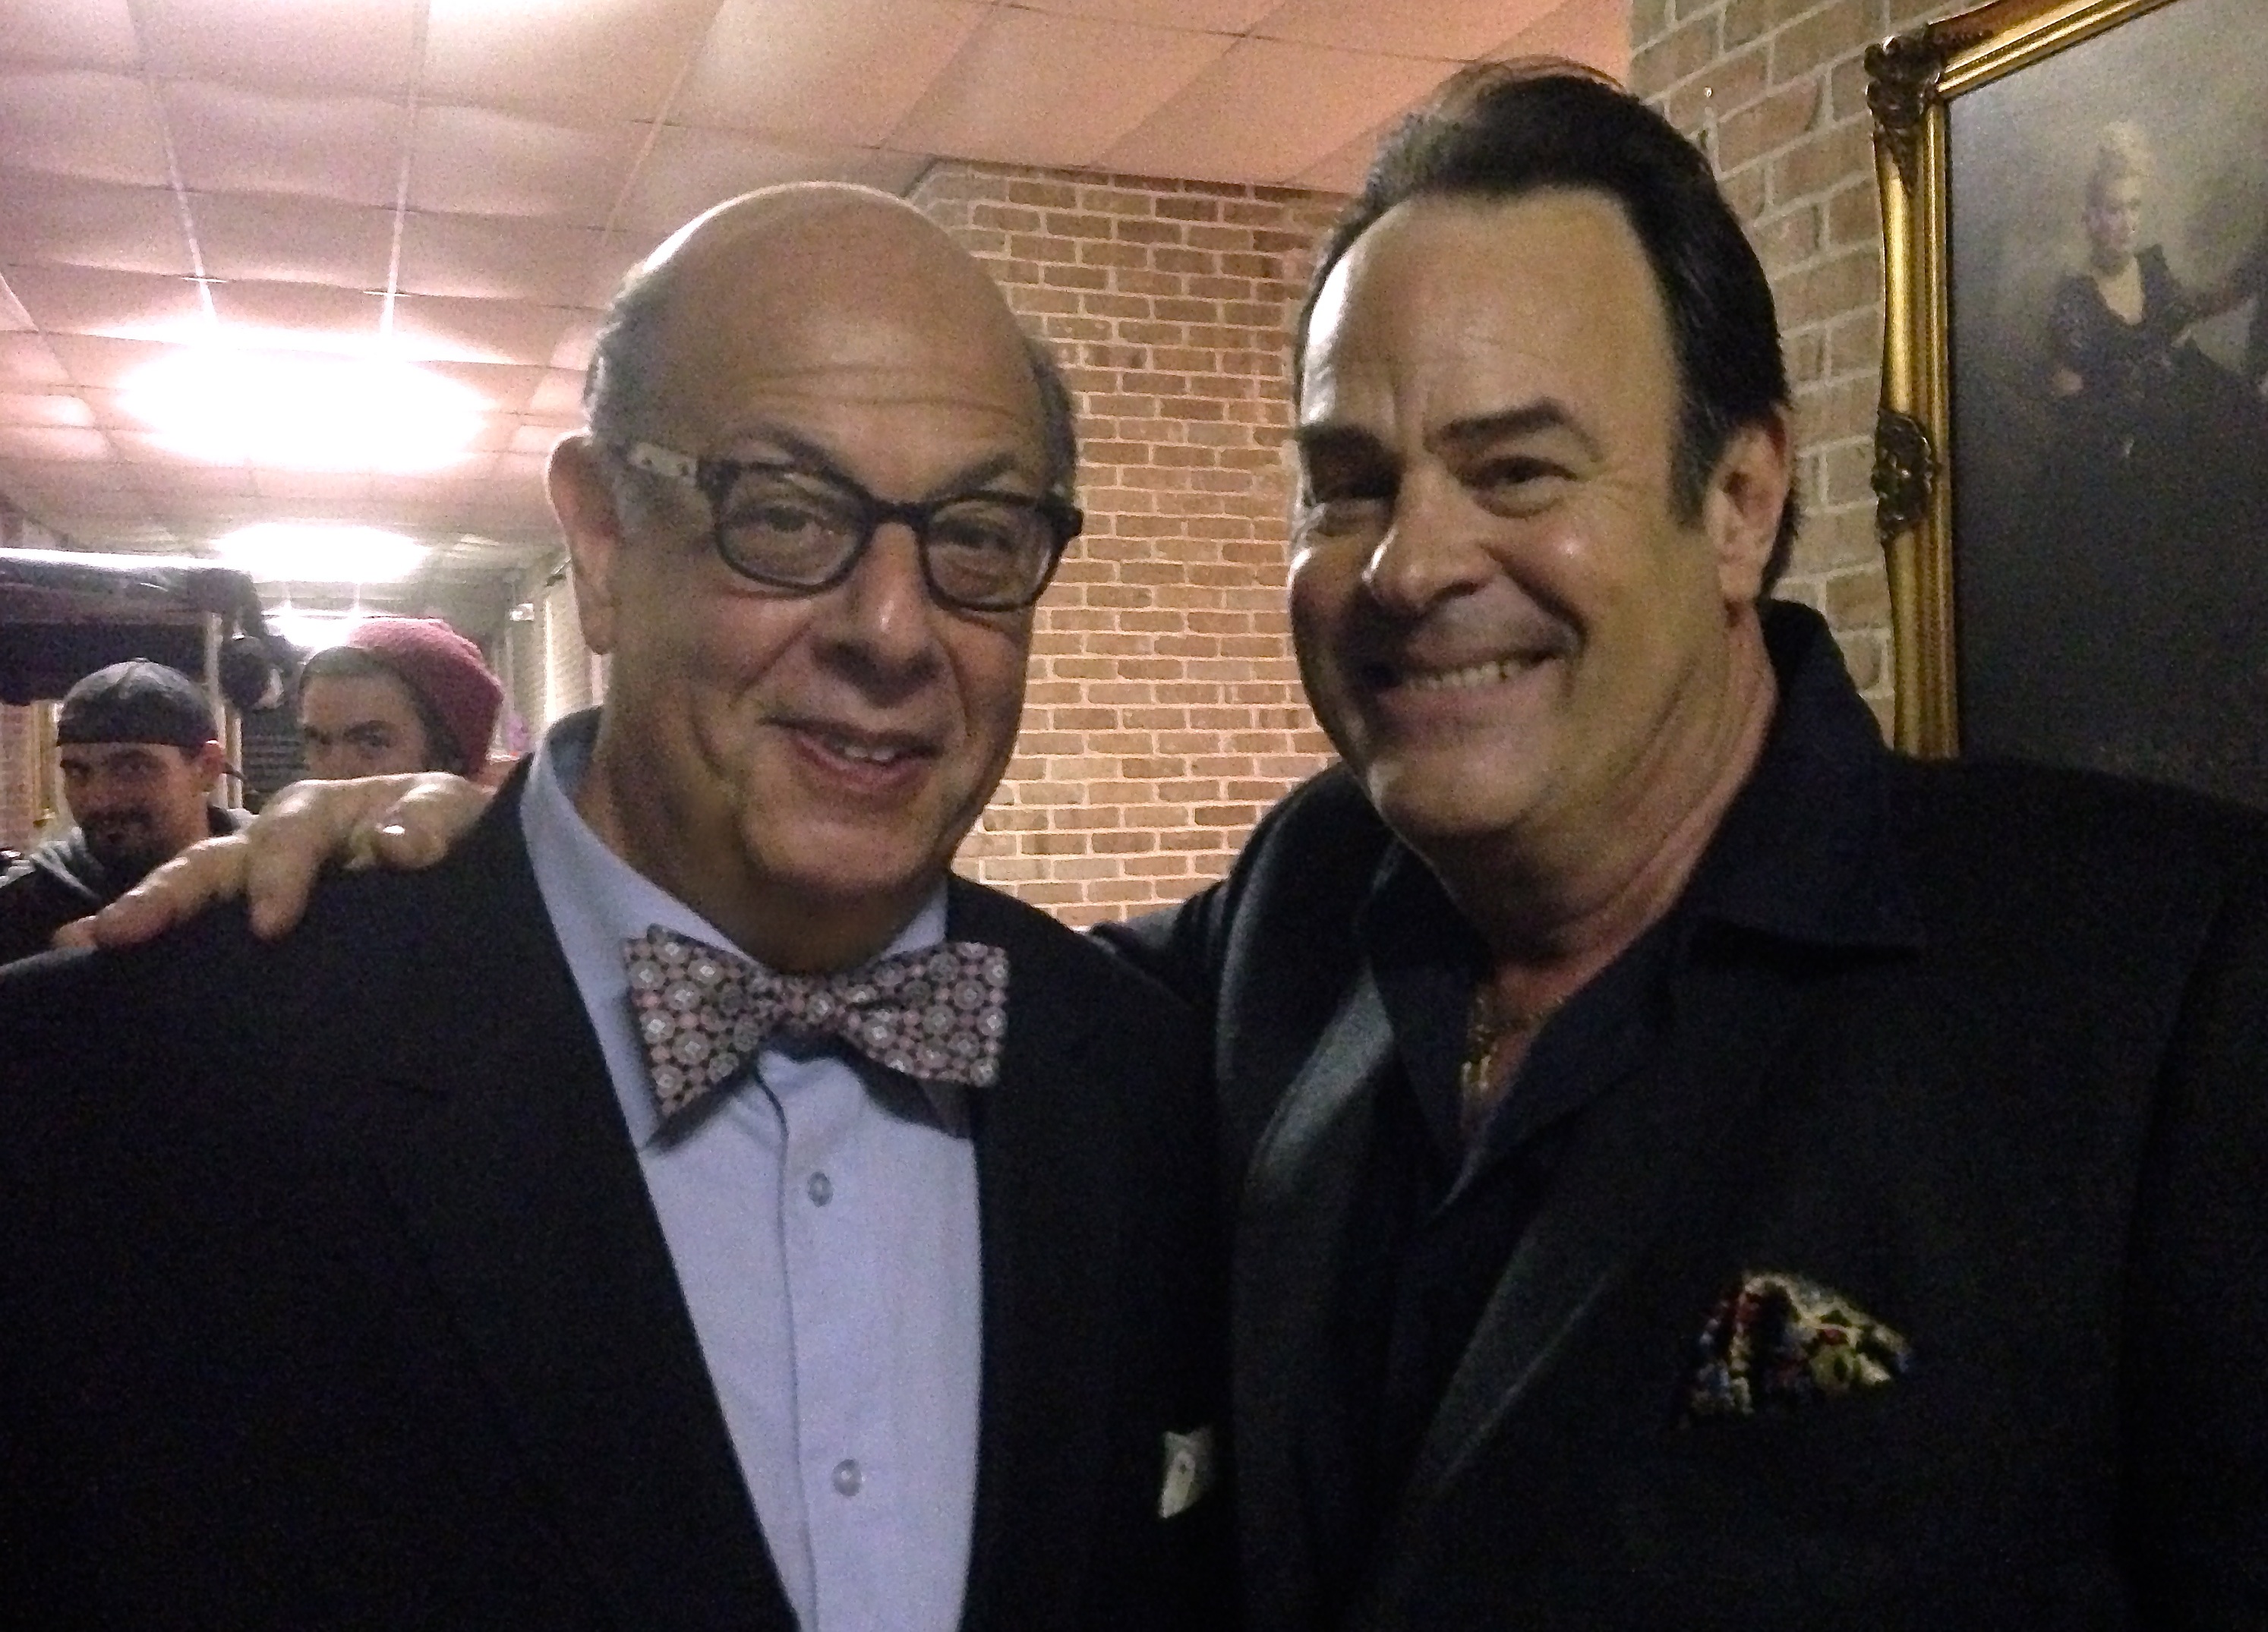 Fred Melamed as Syd Nathan and Dan Aykroyd as Ben Bart in Get On Up